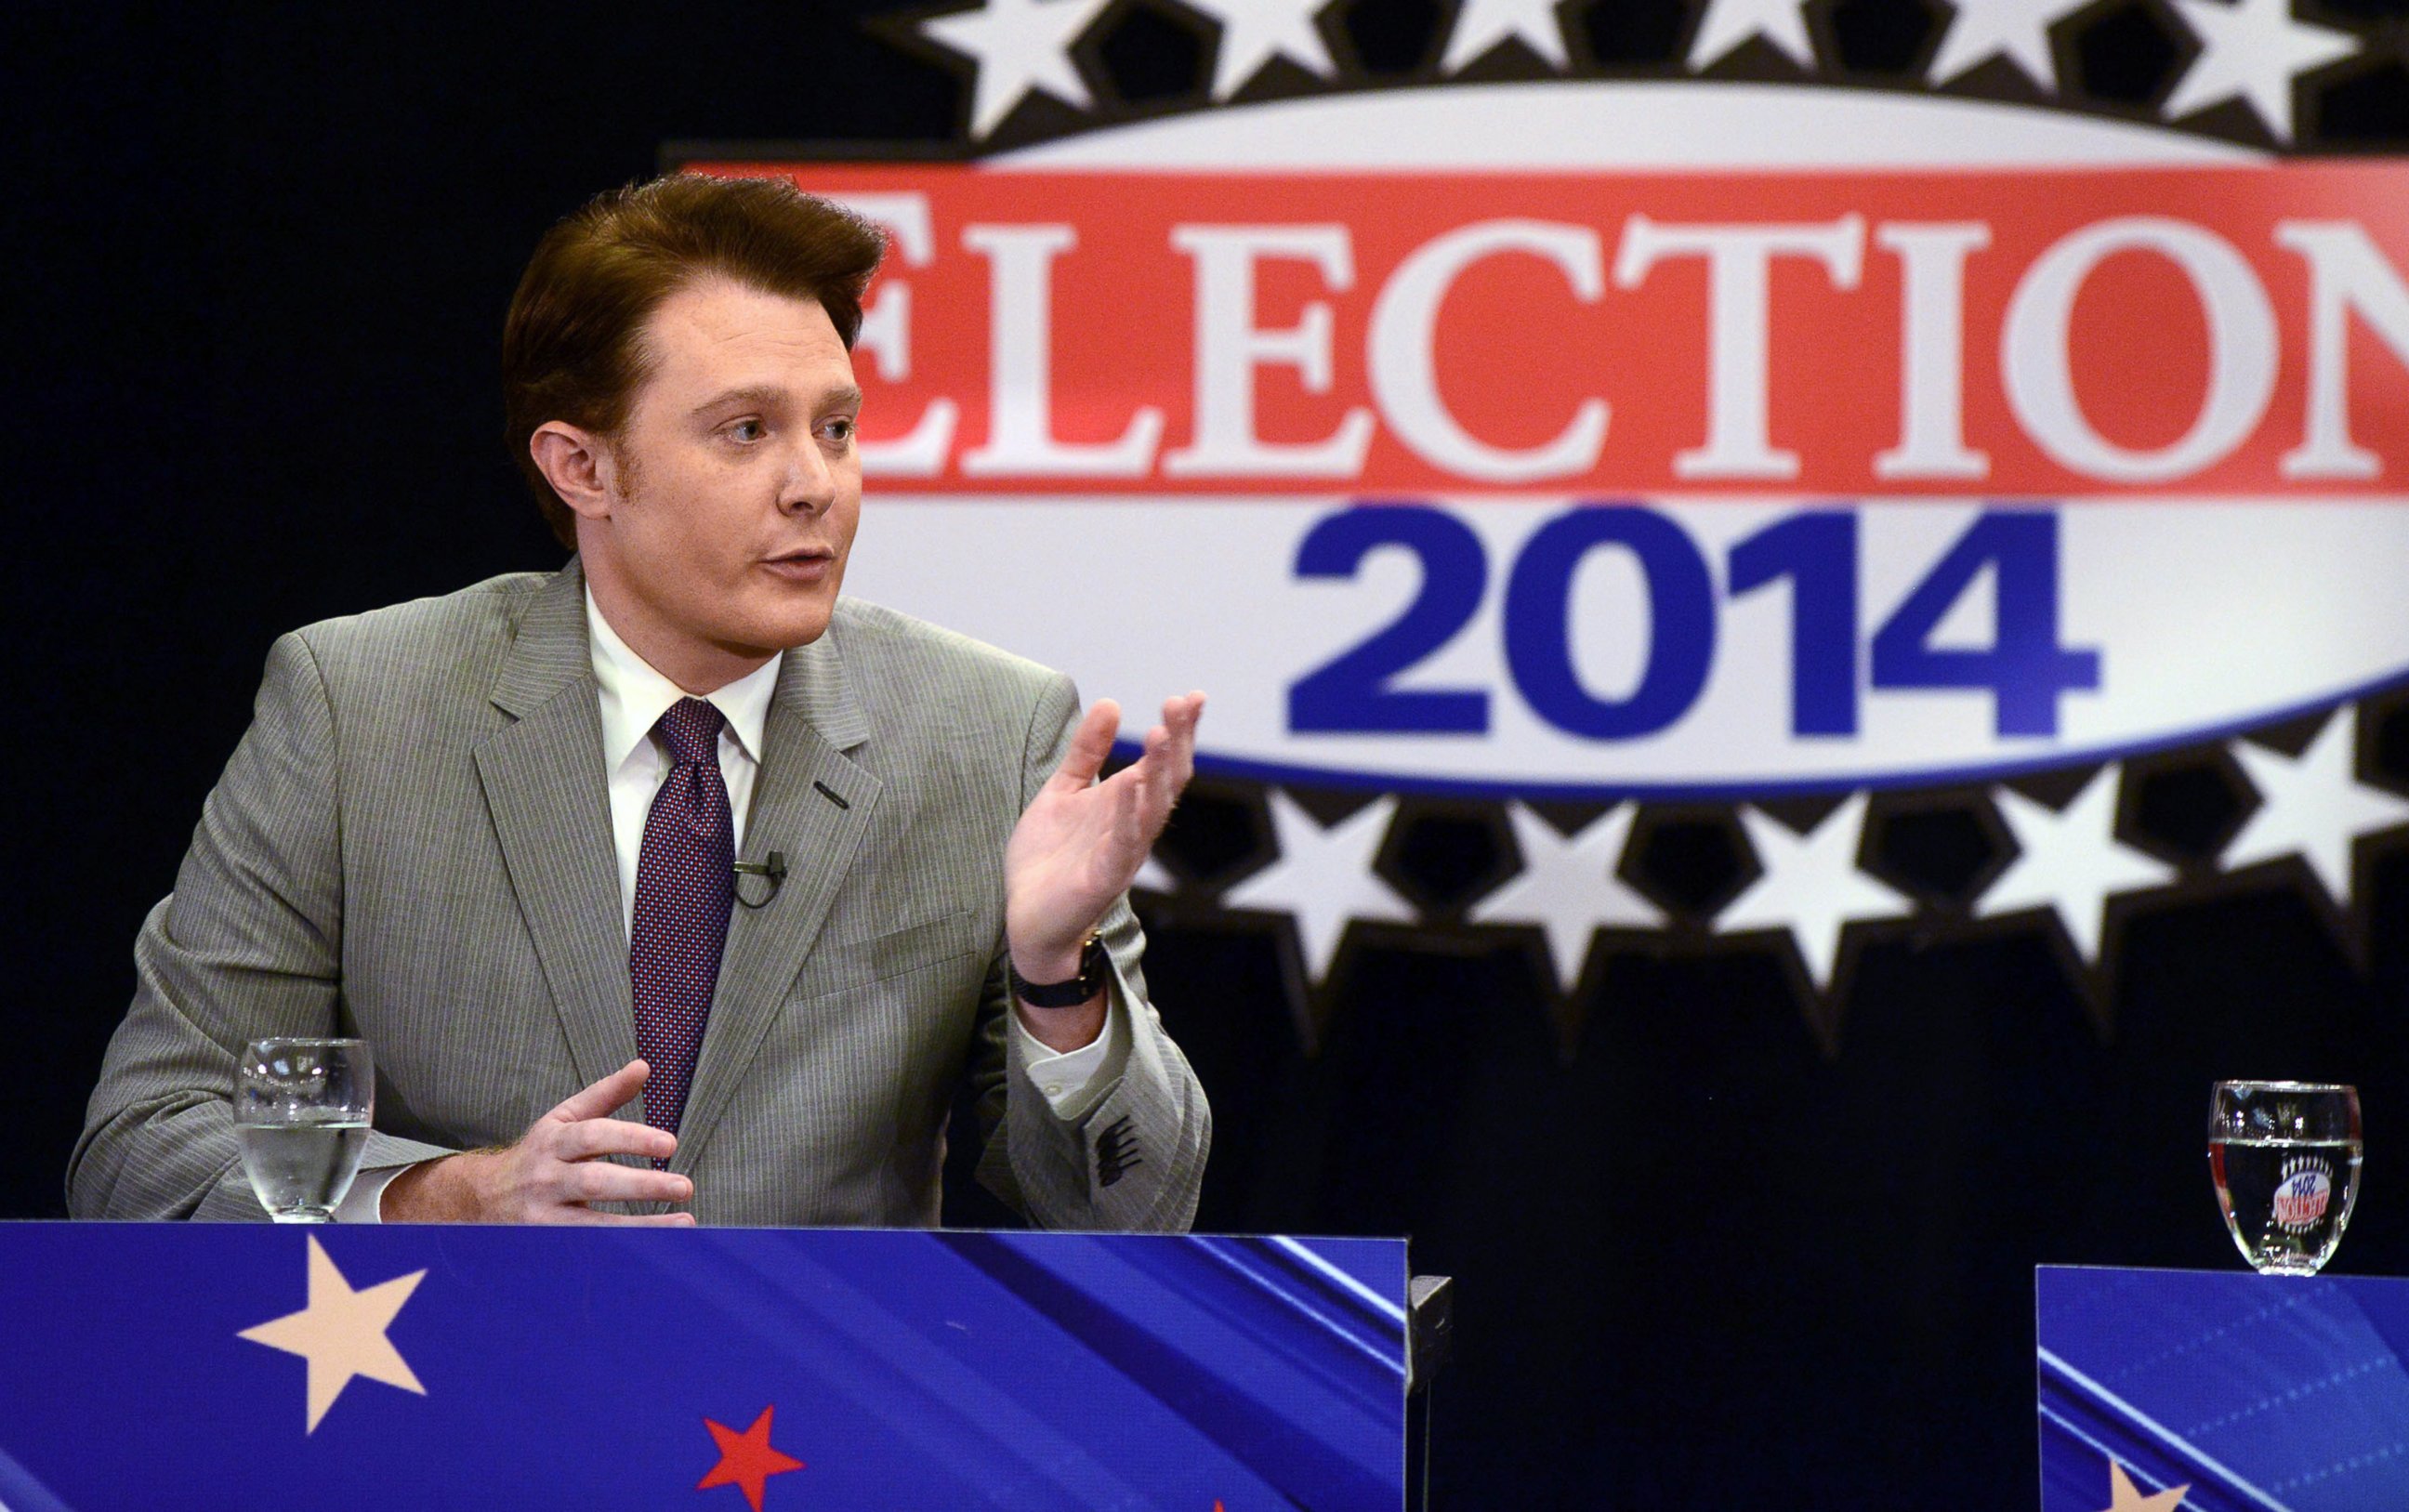 PHOTO: Clay Aiken answers questions during the taping of  a debate with Renee Ellmers, Oct. 6, 2014 at the Pinehurst Resort in Pinehurst, N.C.